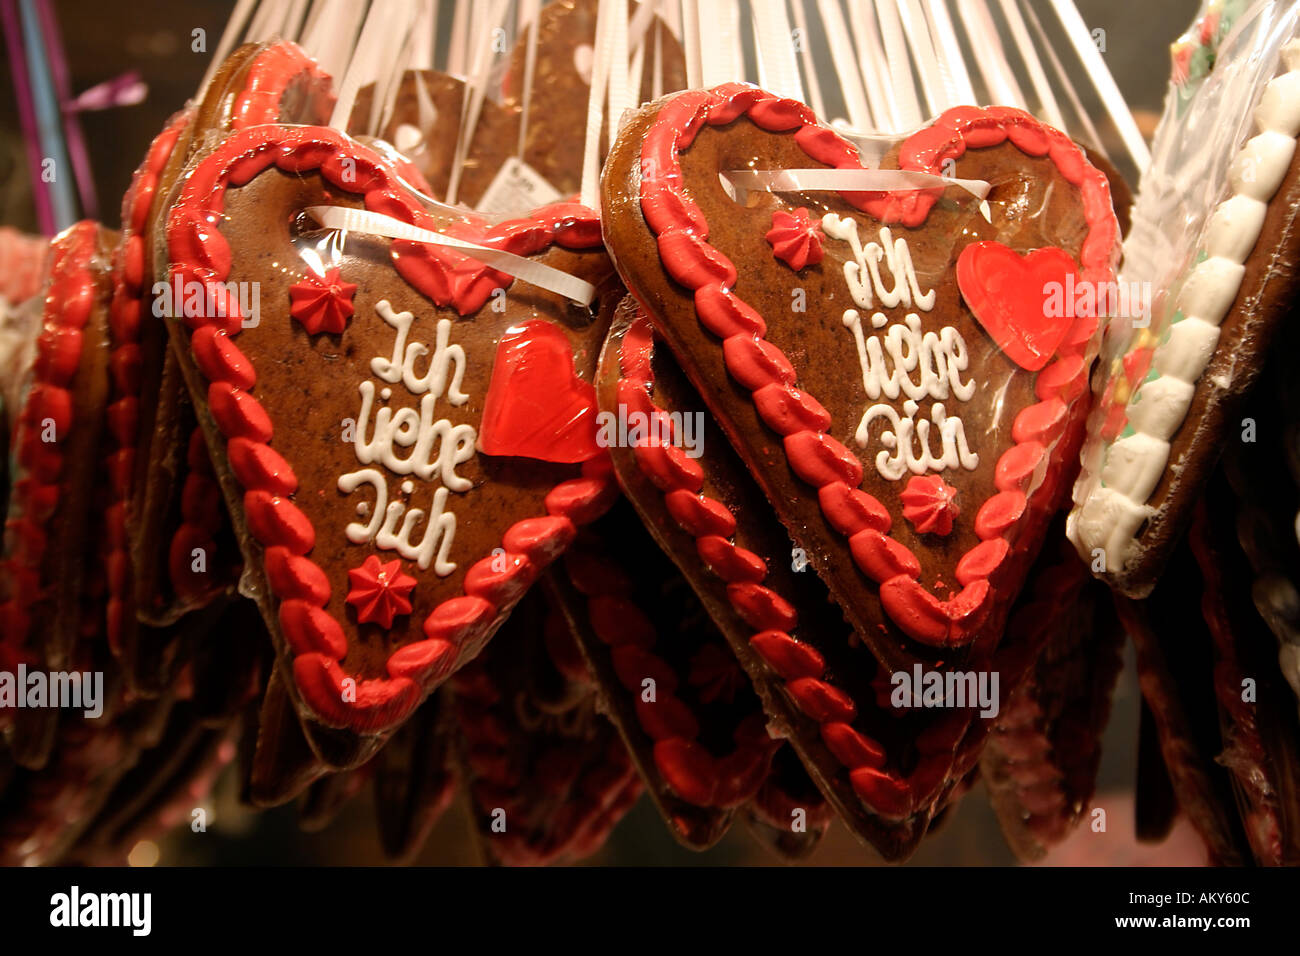 Ich Libe Dich Lebkuchen Gingerbread Hearts at Christmas market stall Cologne Germany Stock Photo